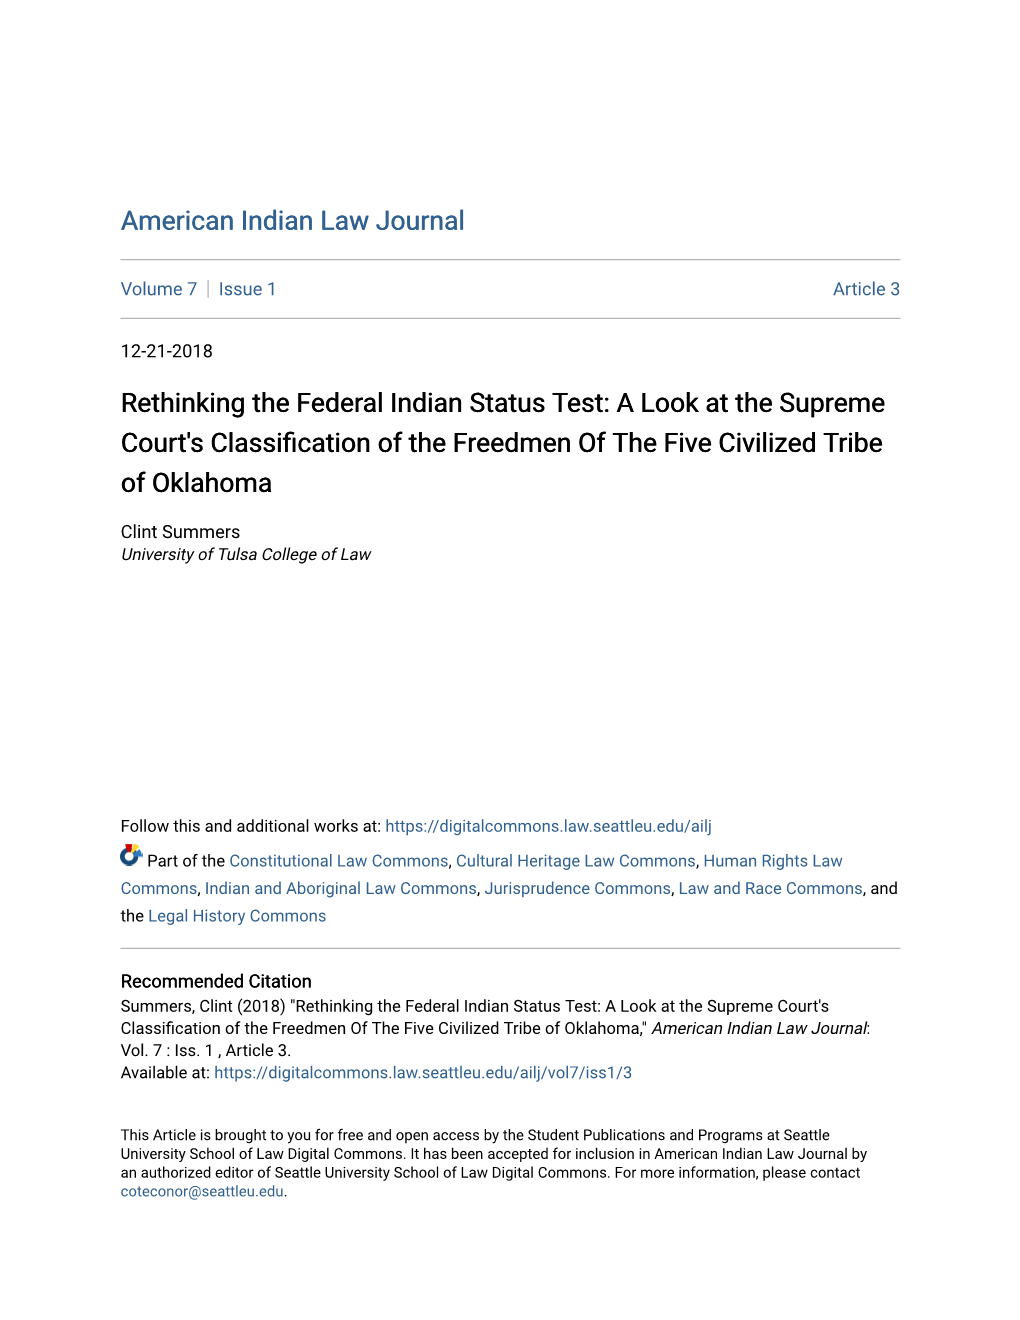 Rethinking the Federal Indian Status Test: a Look at the Supreme Court's Classification of the Rf Eedmen of the Five Civilized Tribe of Oklahoma